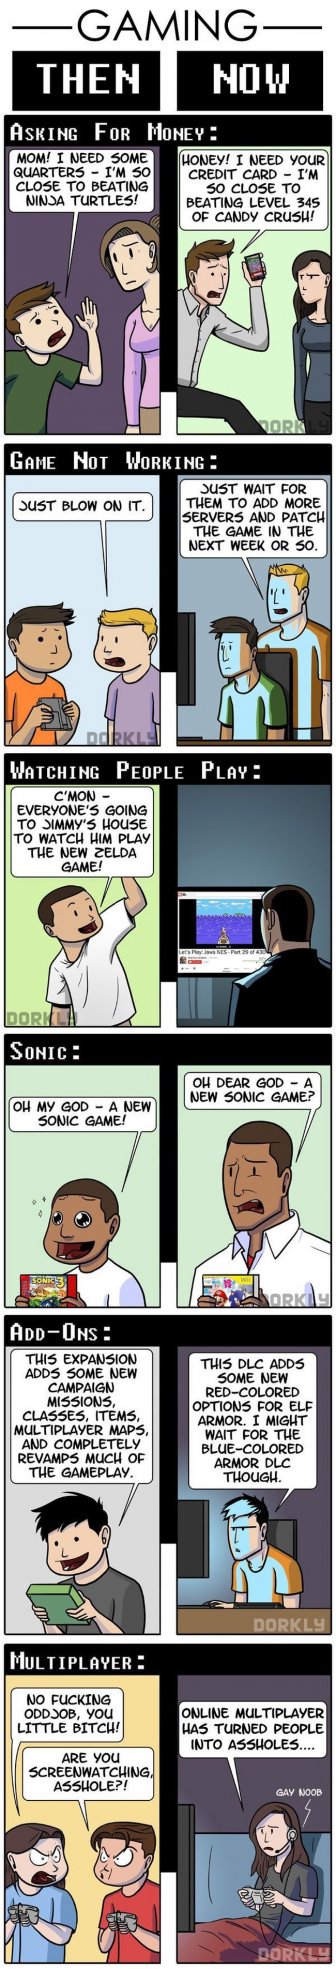 Gaming Then and Now